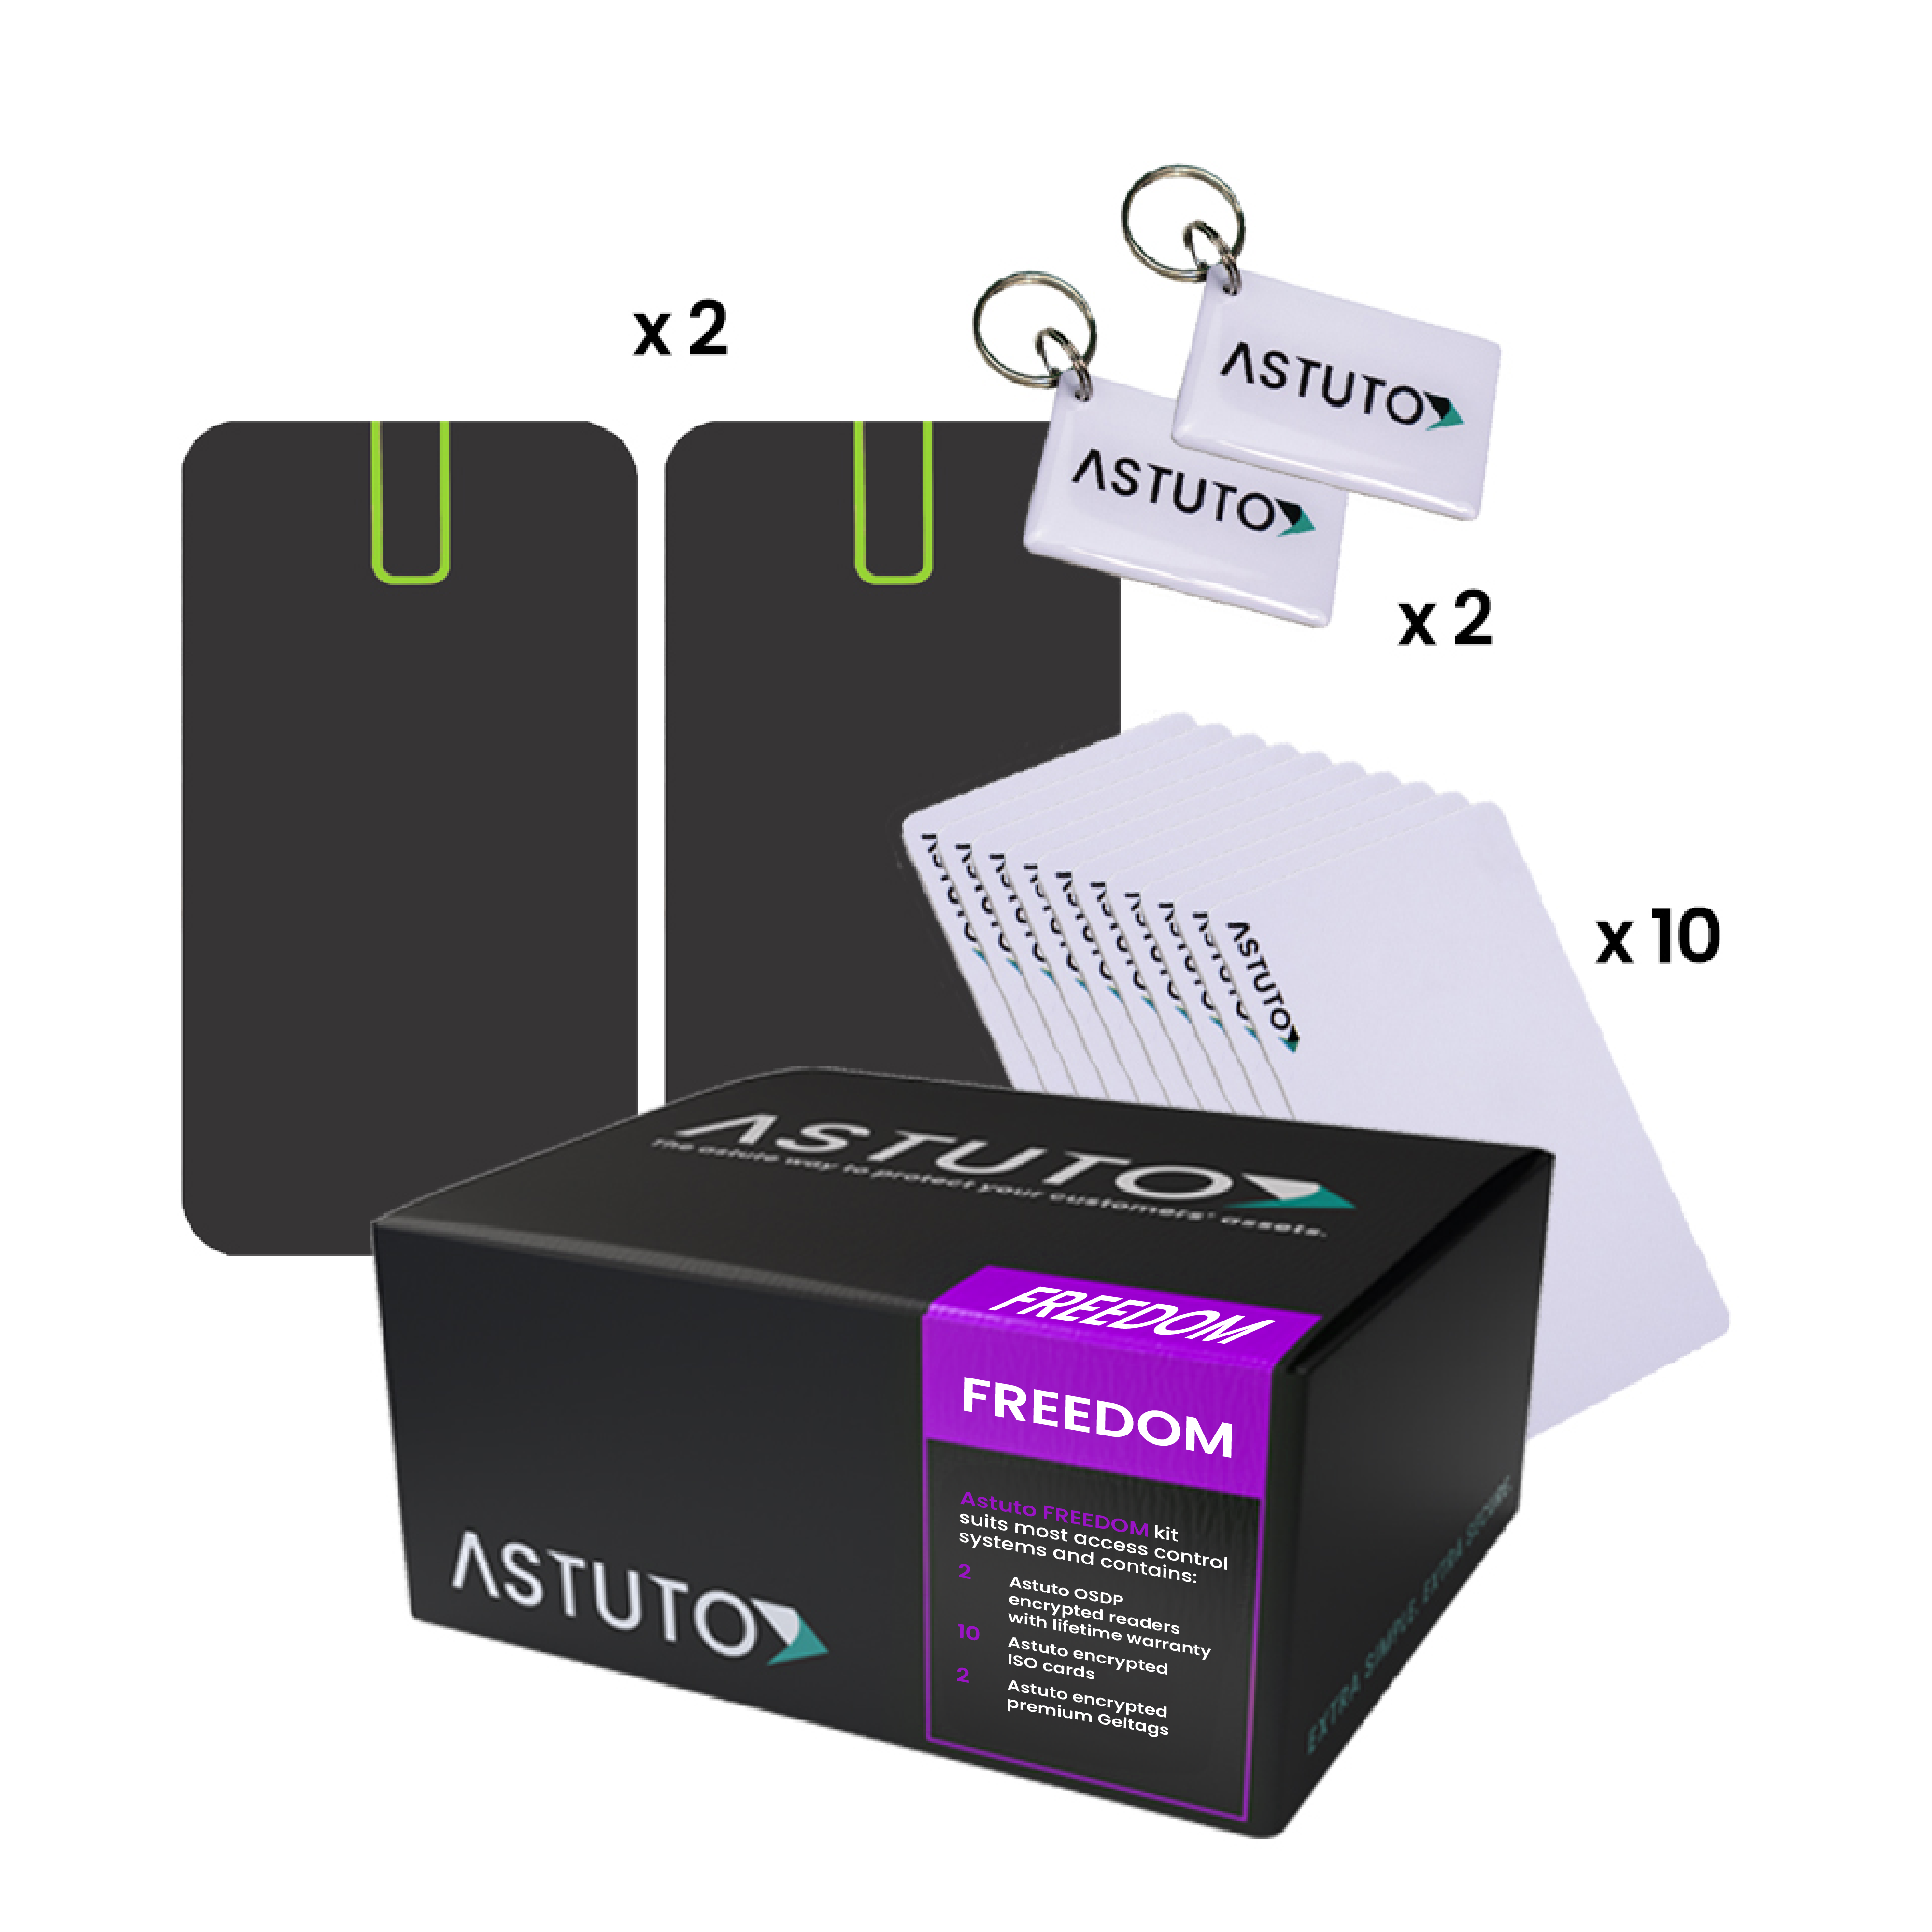 ASTUTO FREEDOM KIT SUITS OSDP COMPATIBLE PANELS - INCLUDES 2 x FREEDOM OSDP READERS 10 x ISO CARDS 2 x PREMIUM GELTAG'S